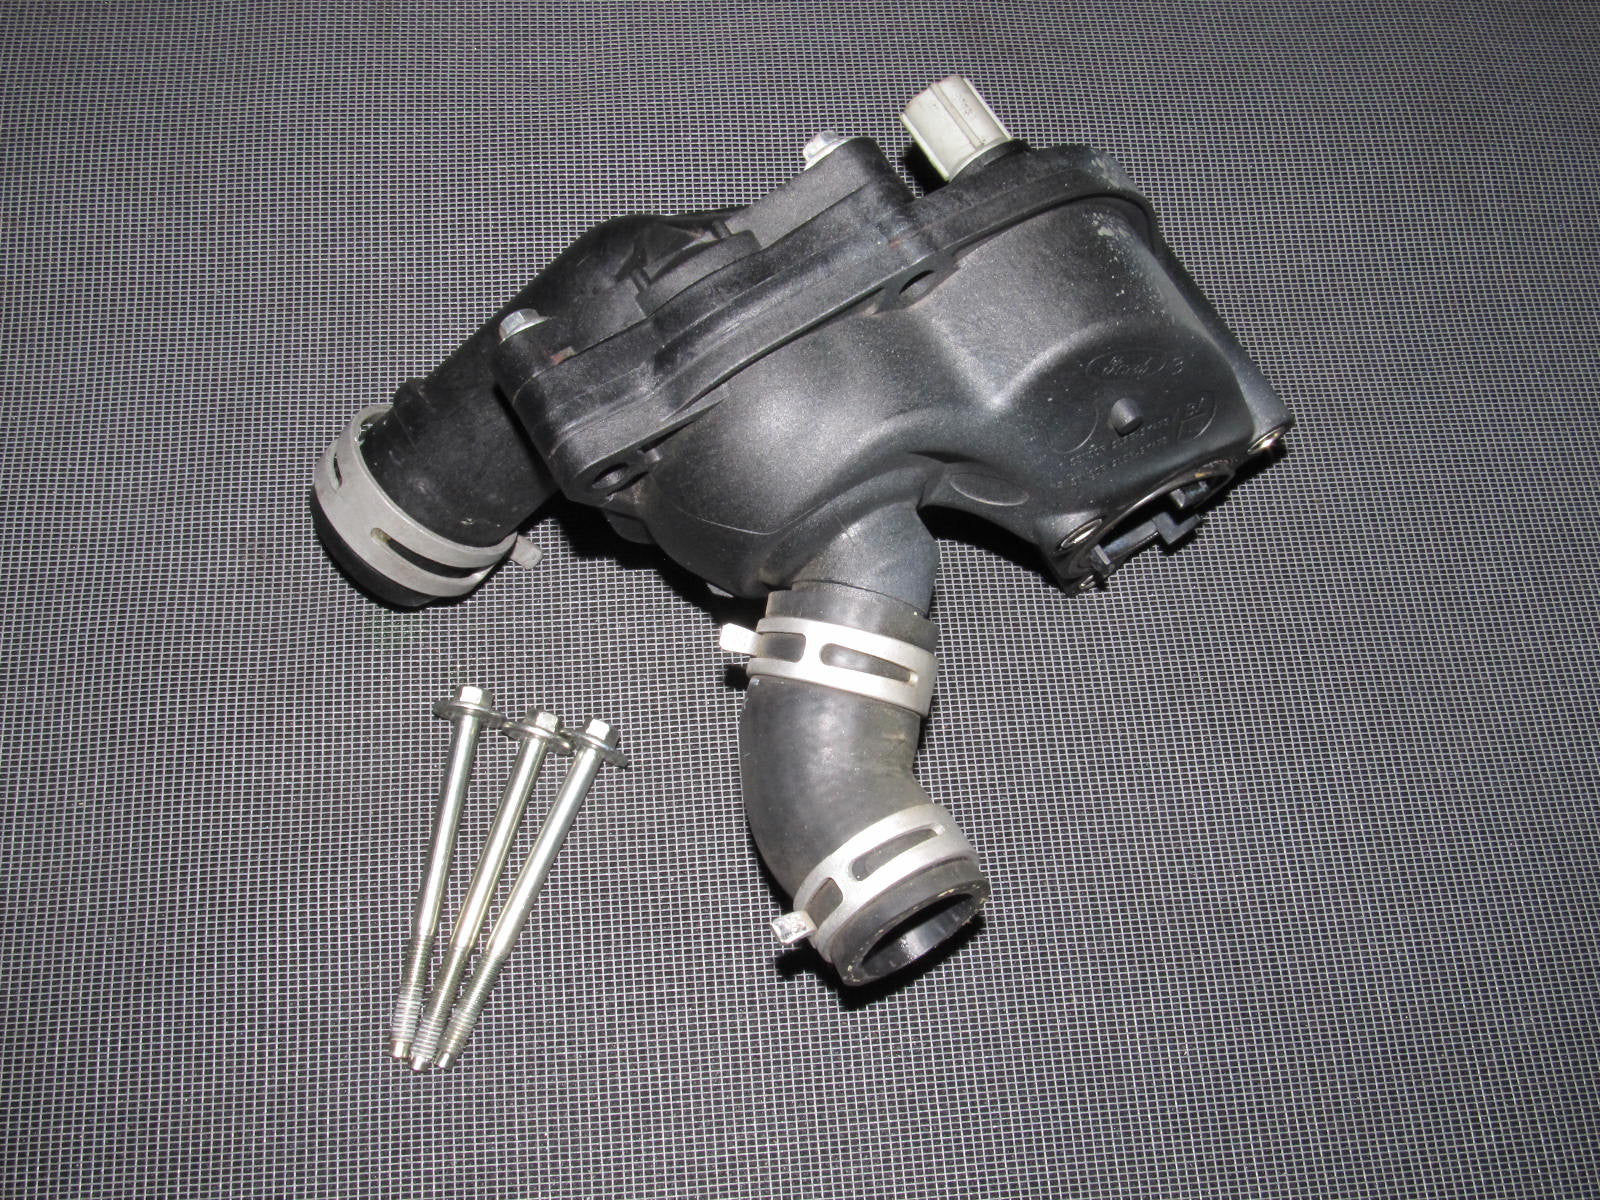 05 06 07 08 09 10 Ford Mustang 4.0 V6 Thermostats Housing with Sensor